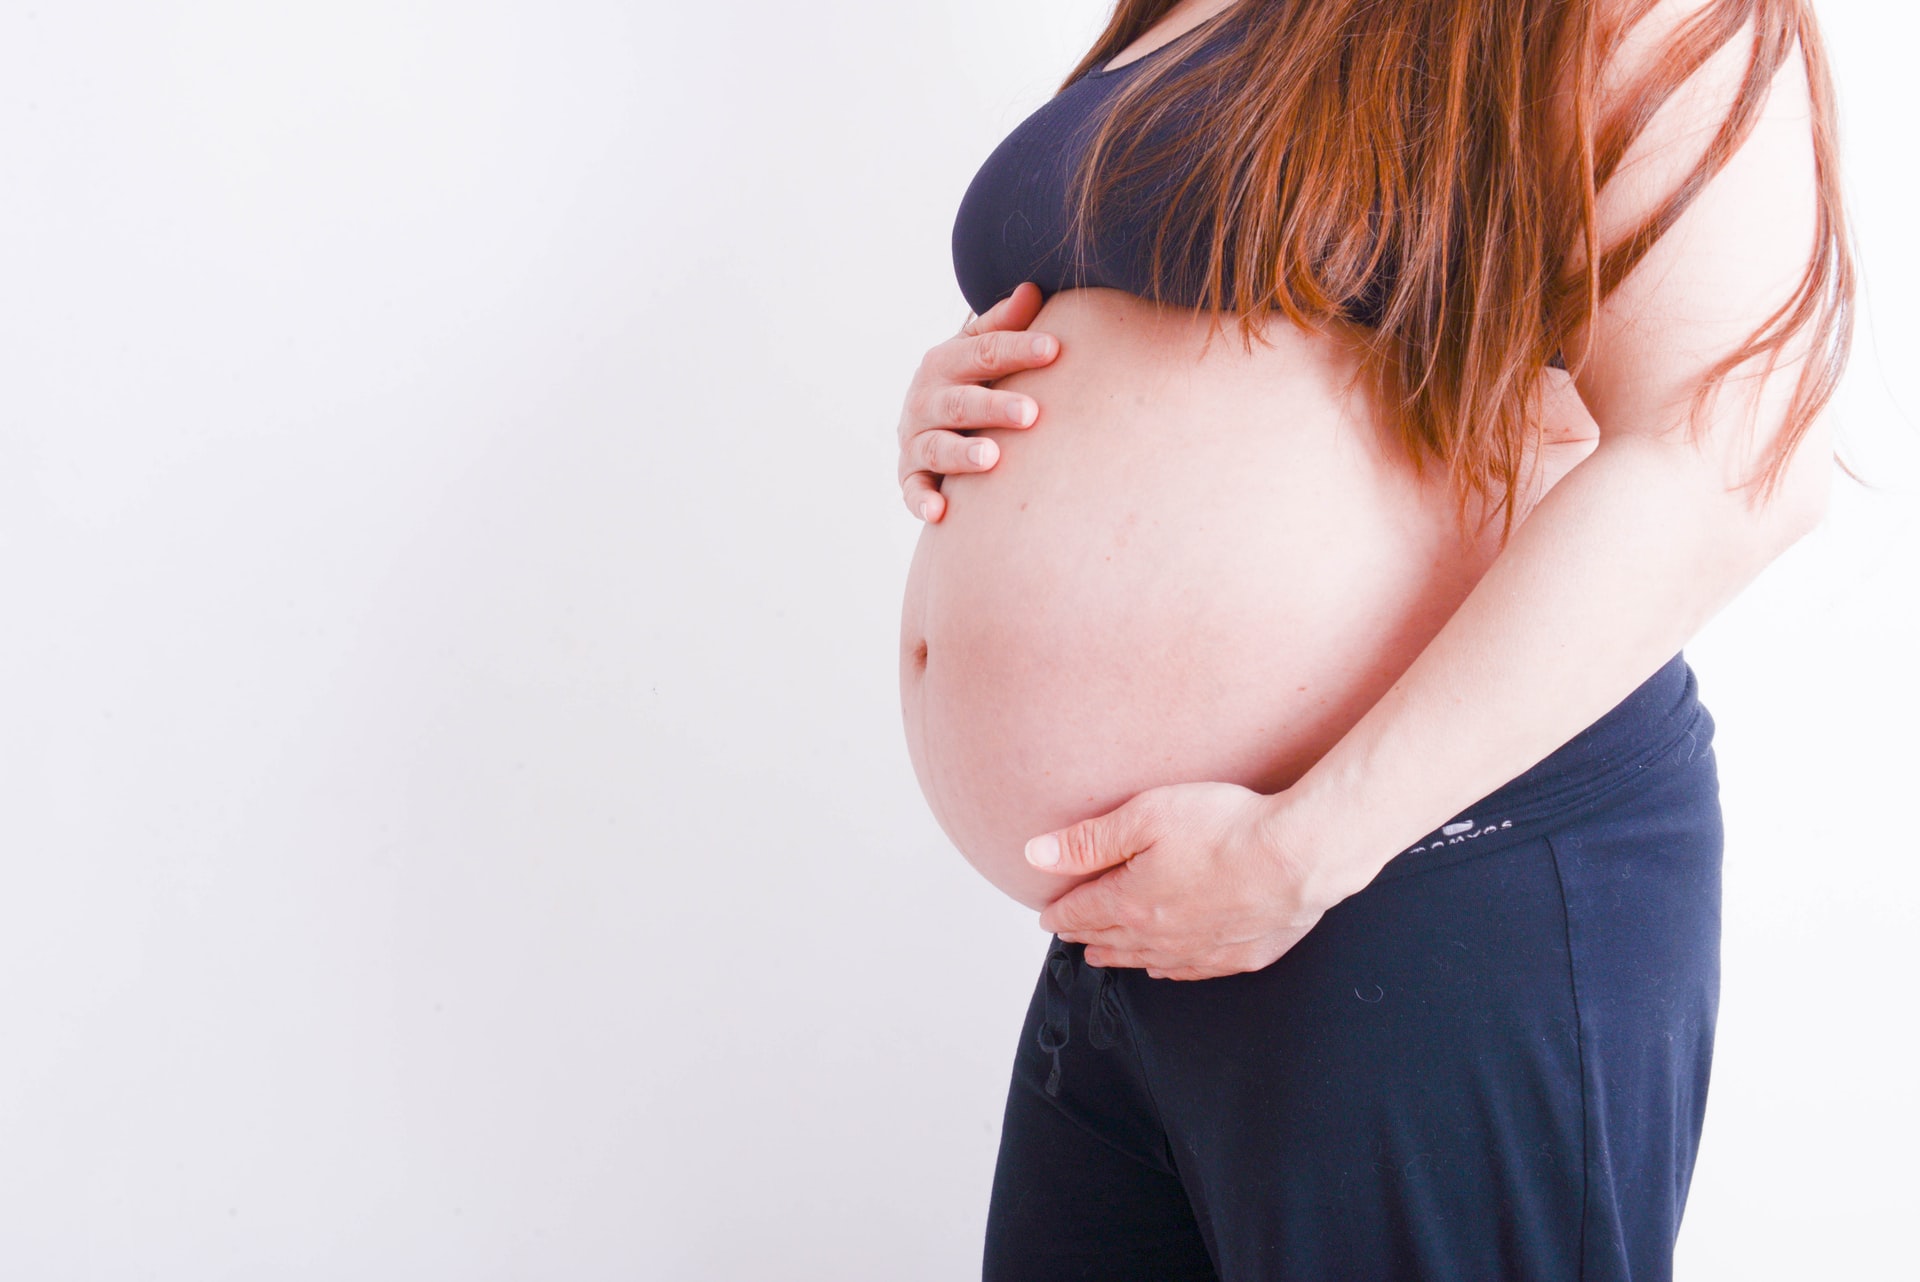 Abdominal pain in pregnancy – what could it mean?